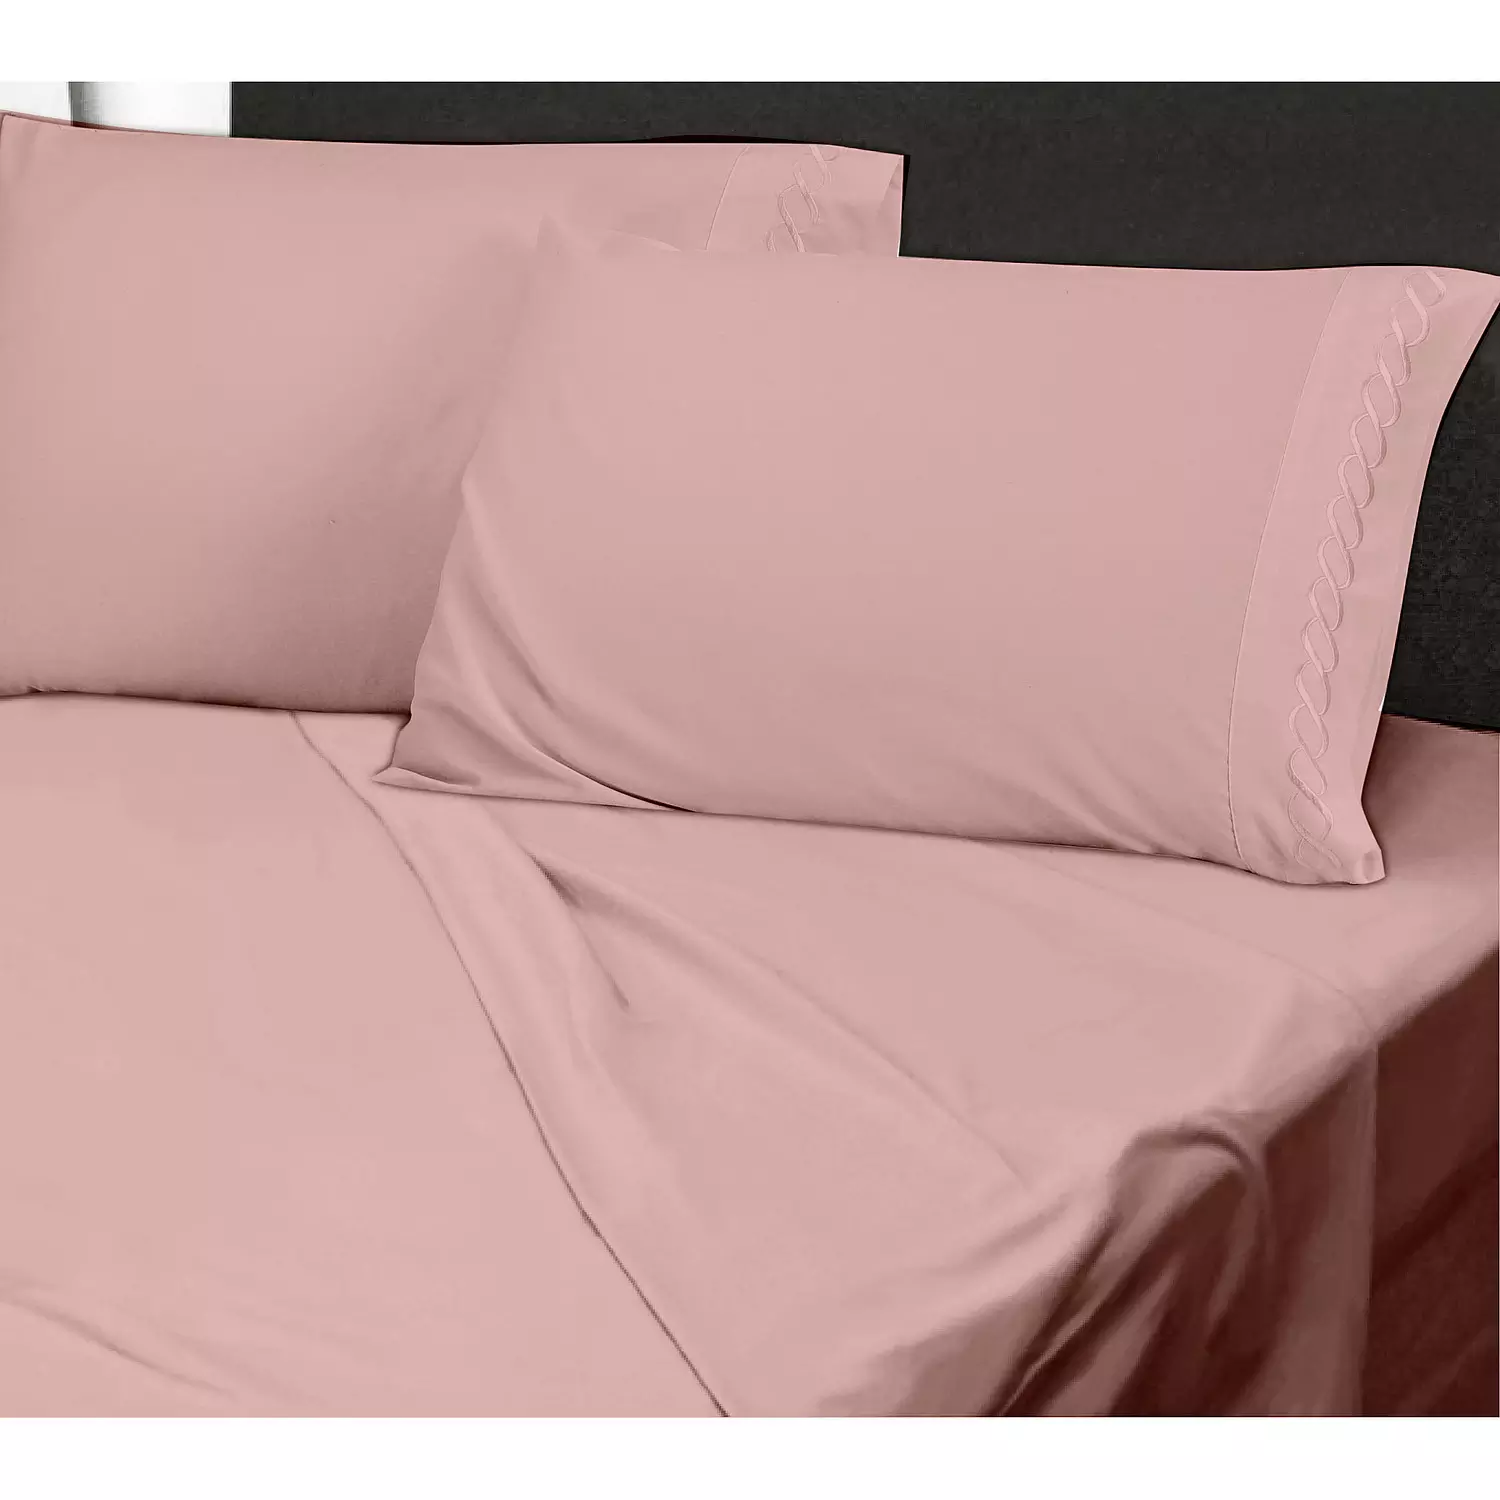 Mercure, sheet set with embroided helix detail, twin, pink